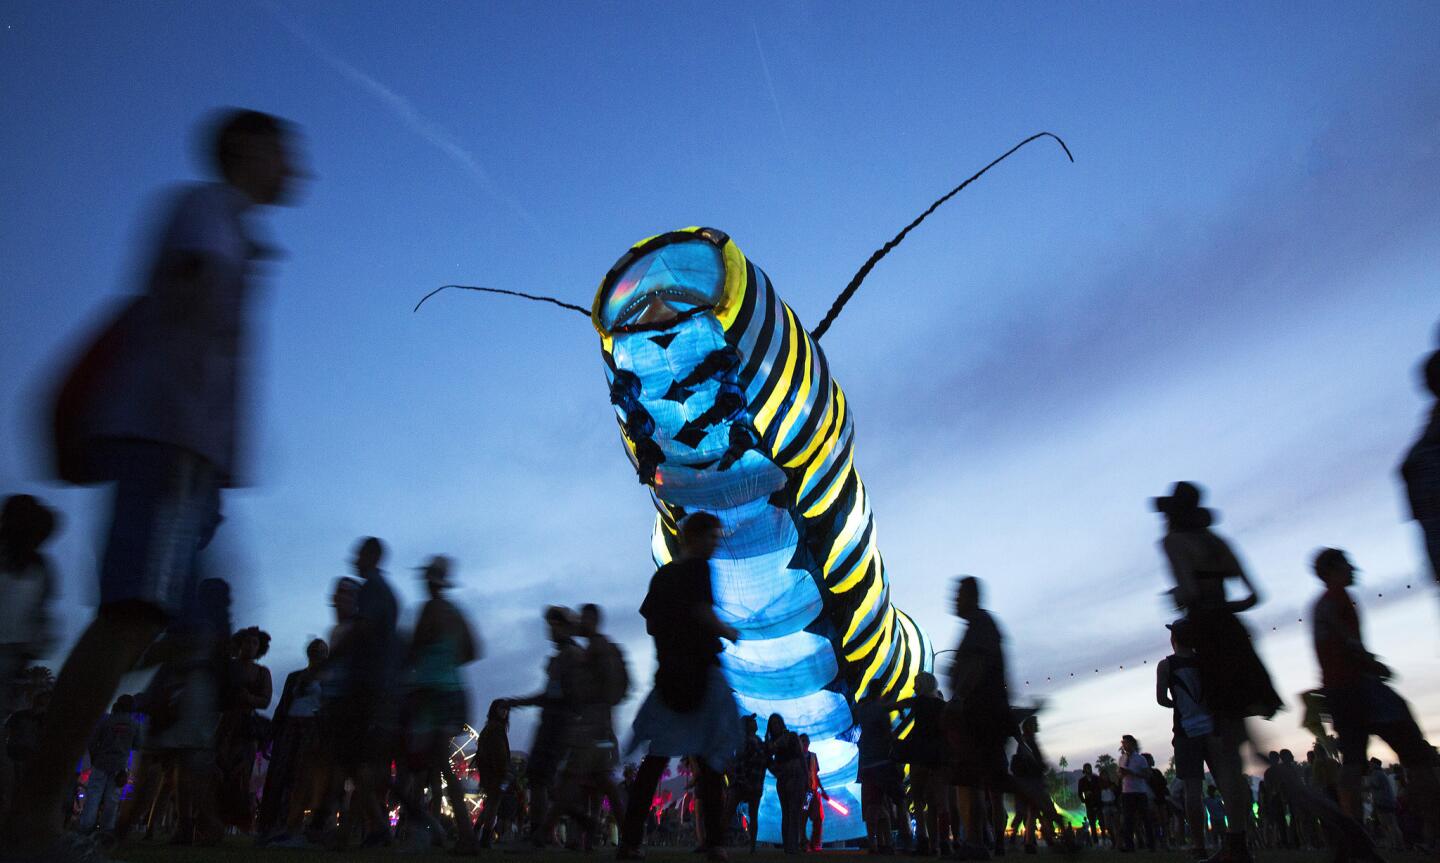 Poetic Kinetics' giant caterpillar moves between venues at the Coachella Valley Music and Arts Festival.